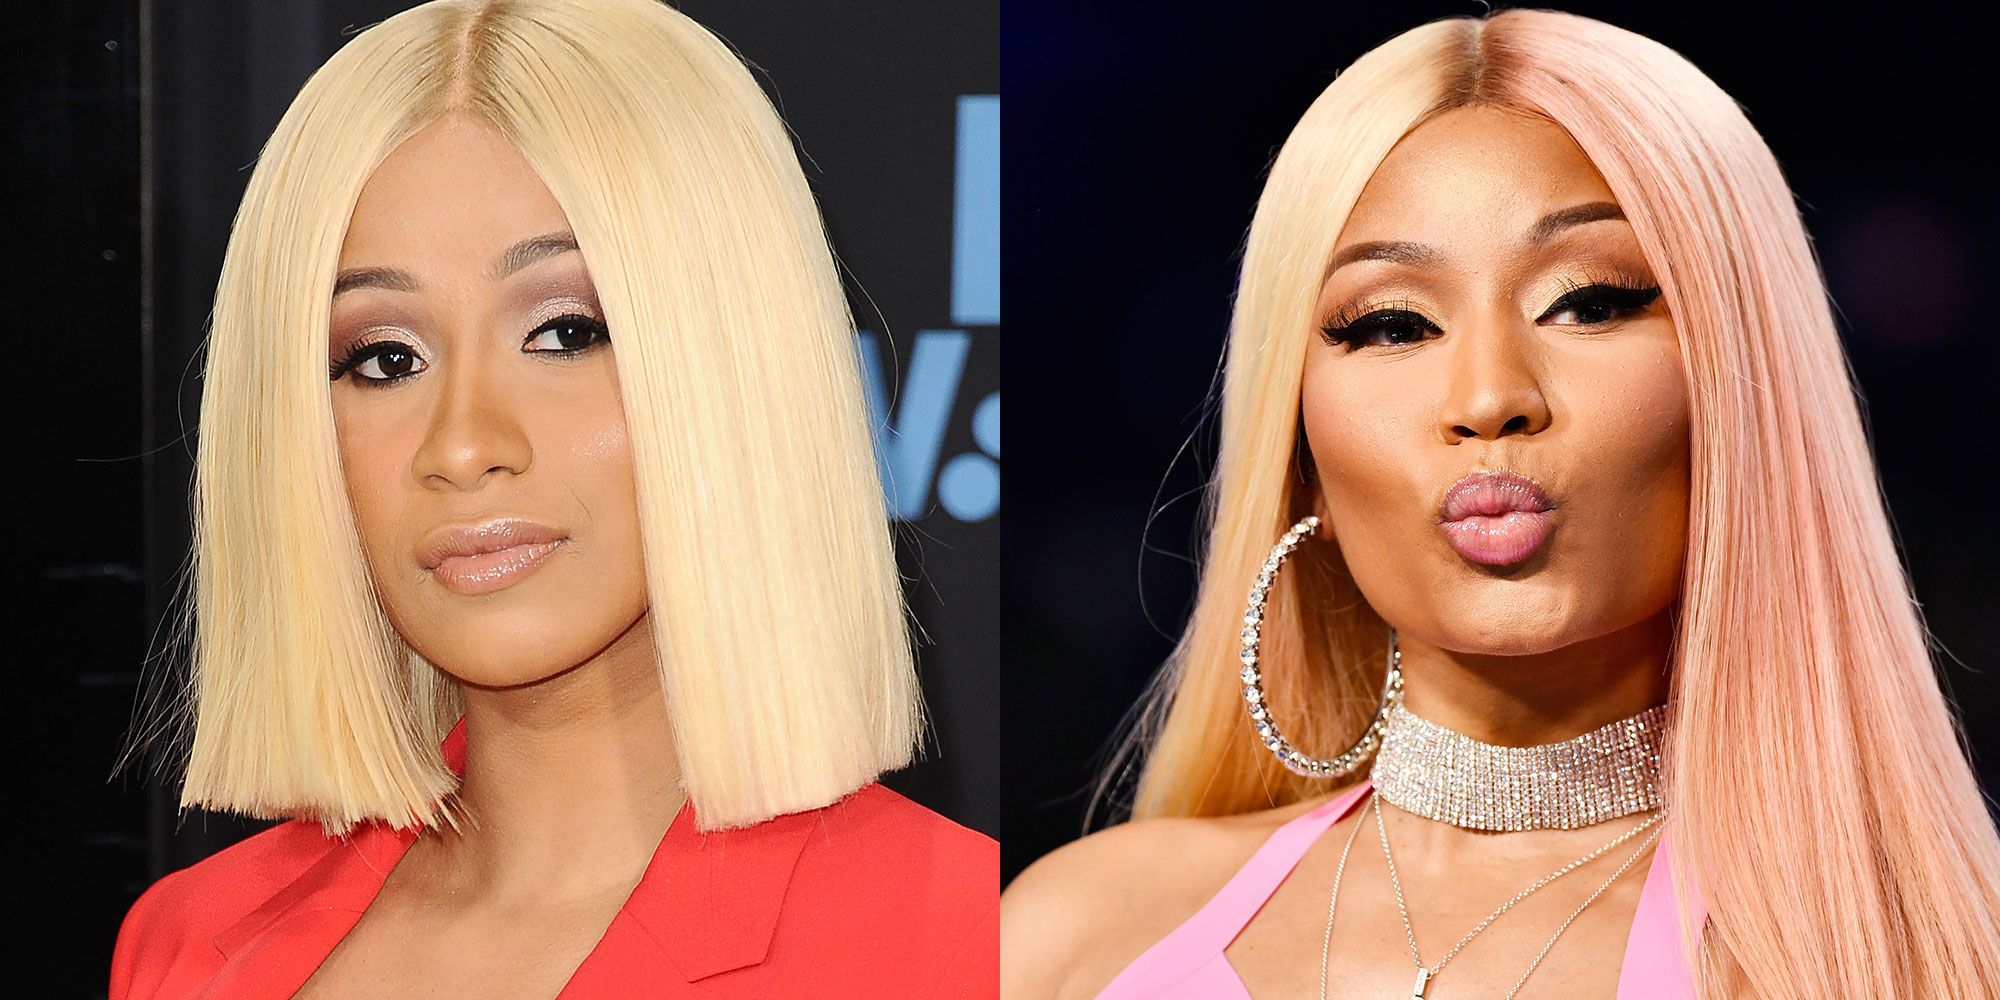 What I Learned About Style From Nicki Minaj and Beyoncé's Video